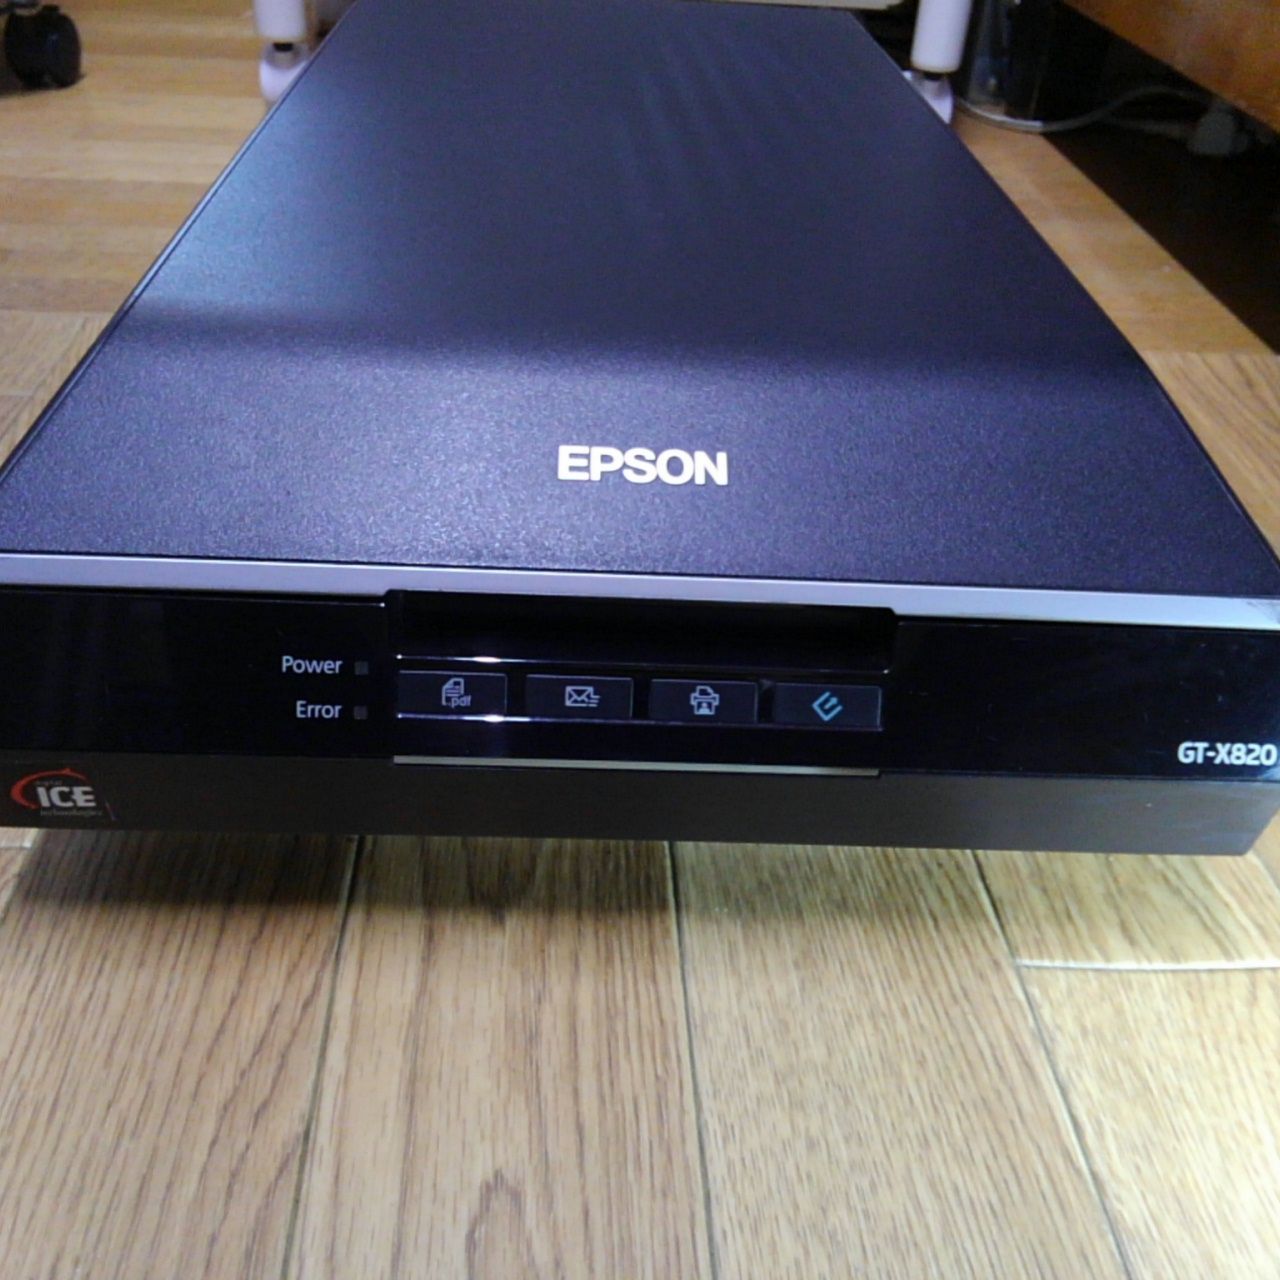 EPSON GT-X820 フィルムスキャナー フィルムホルダー付属 動作良好電子書籍